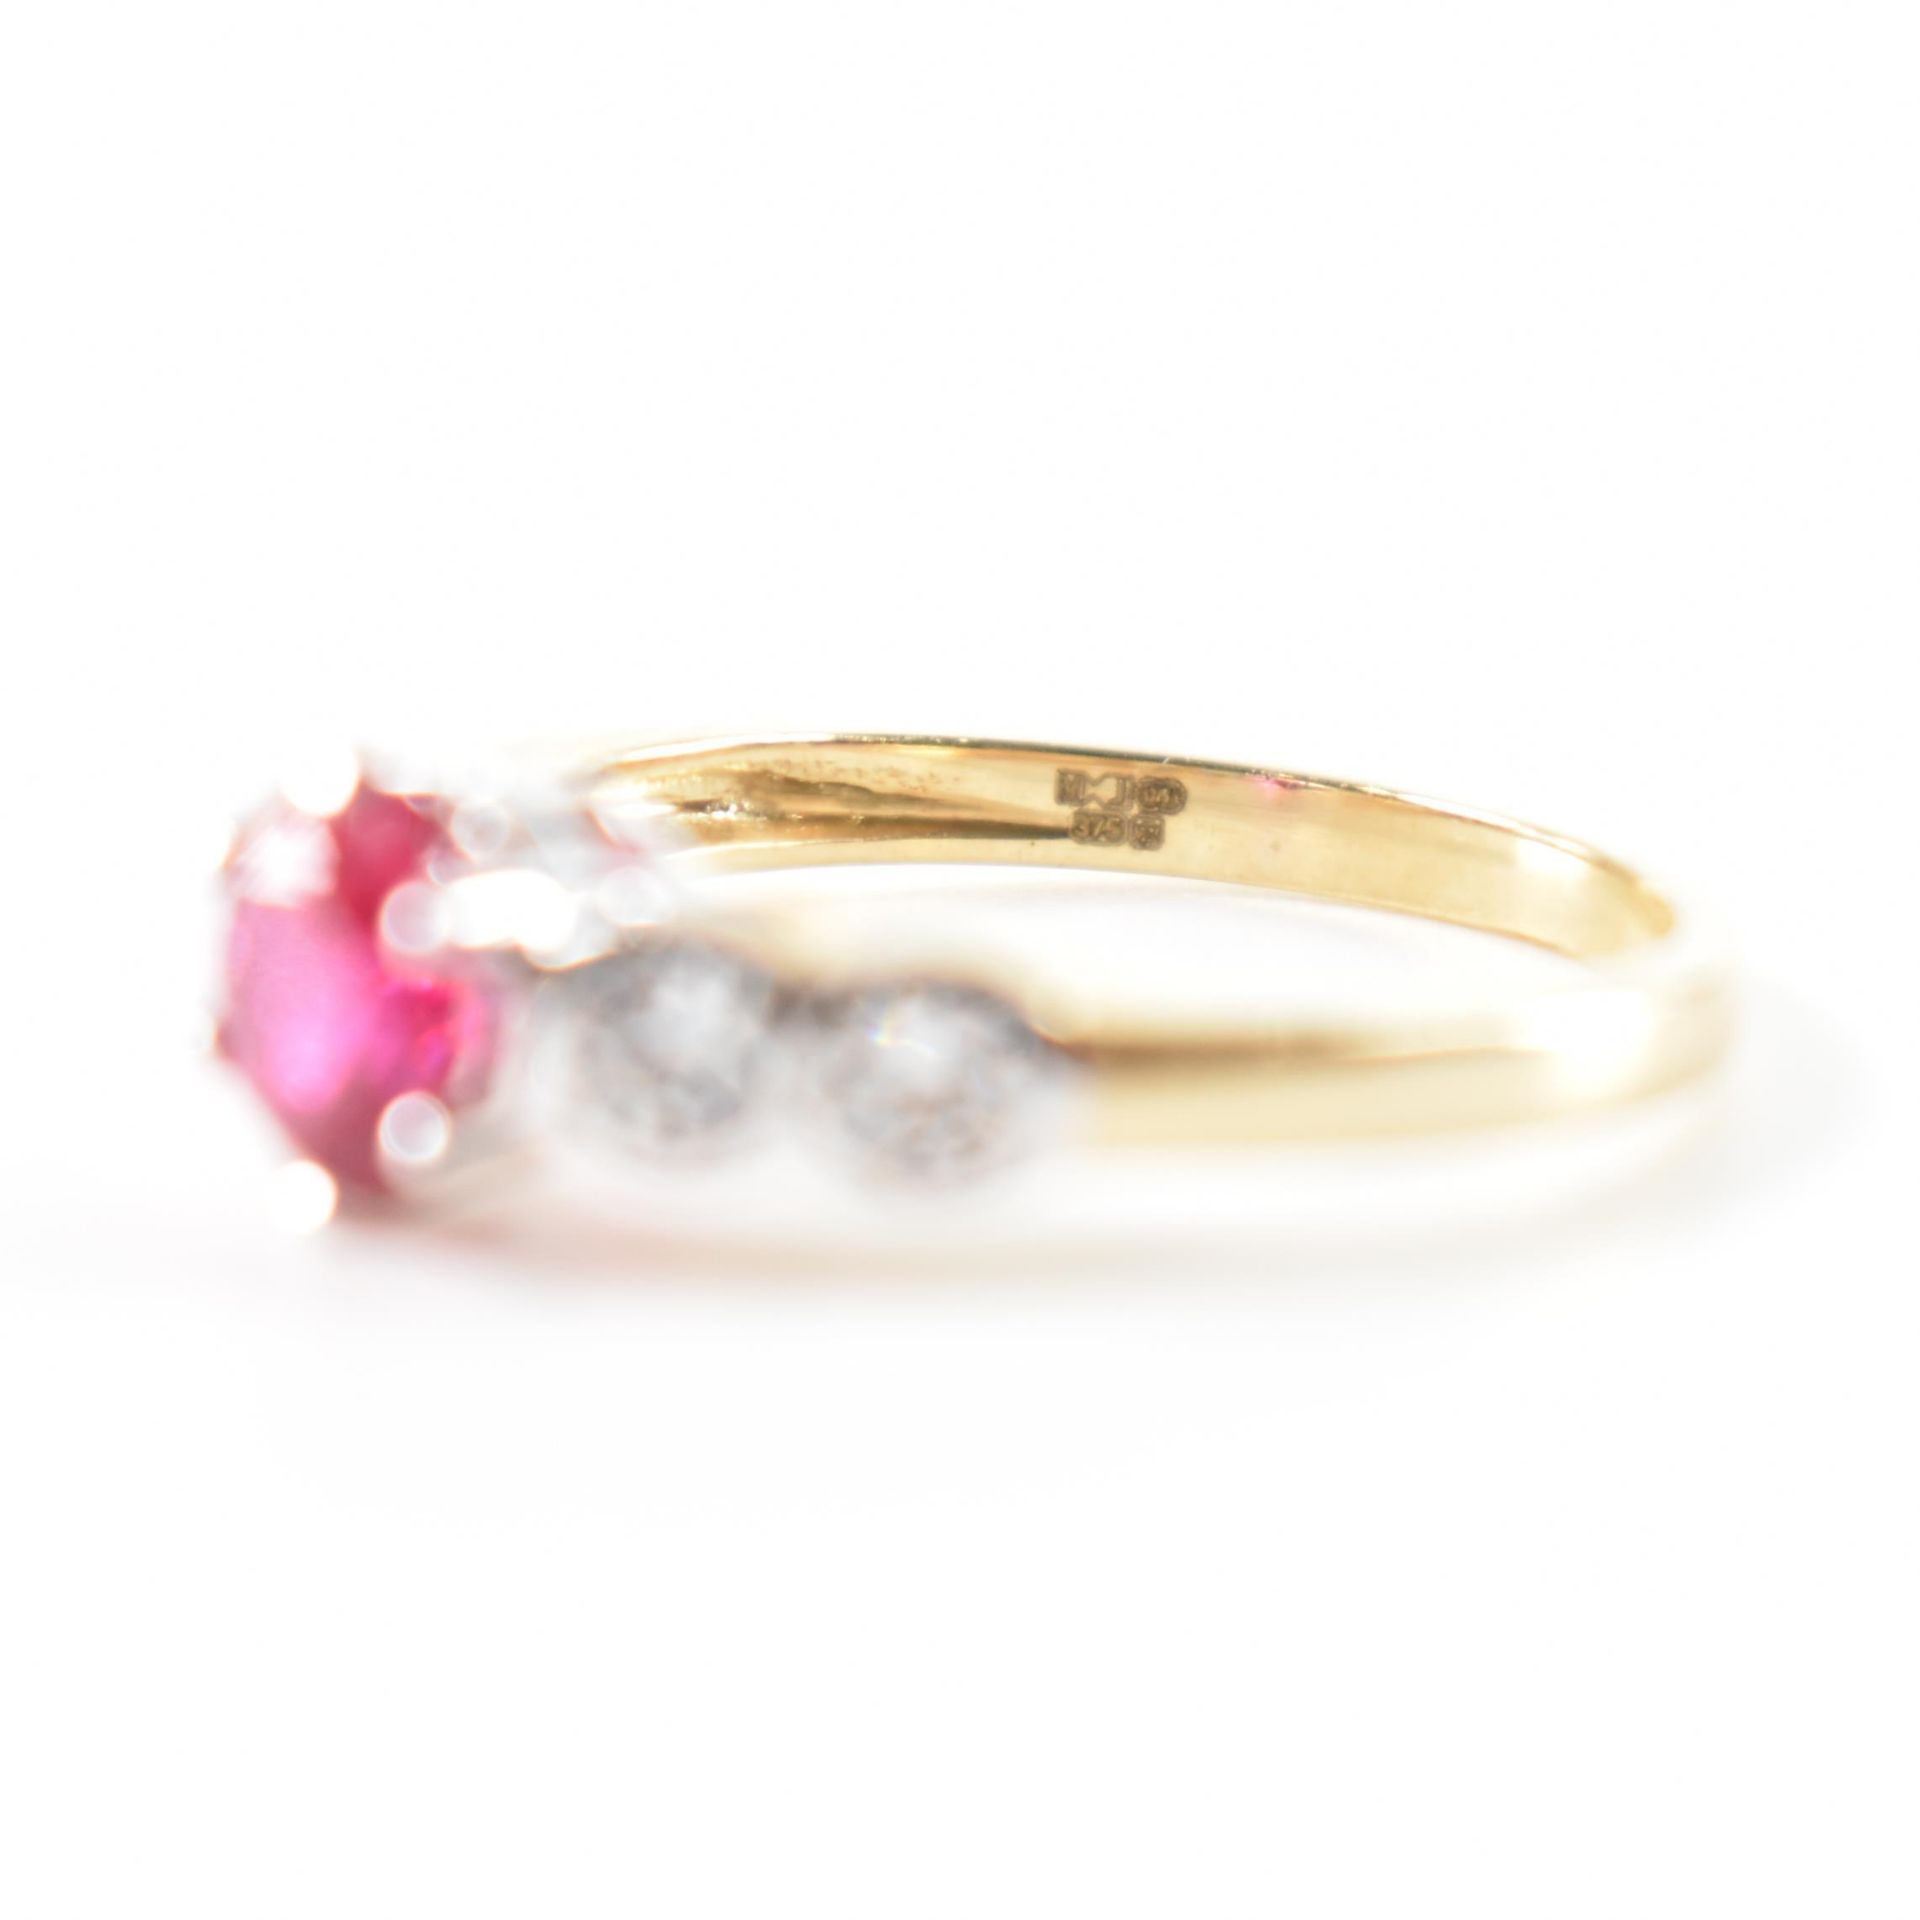 HALLMARKED 9CT GOLD SYNTHETIC RUBY & CZ RING - Image 6 of 8